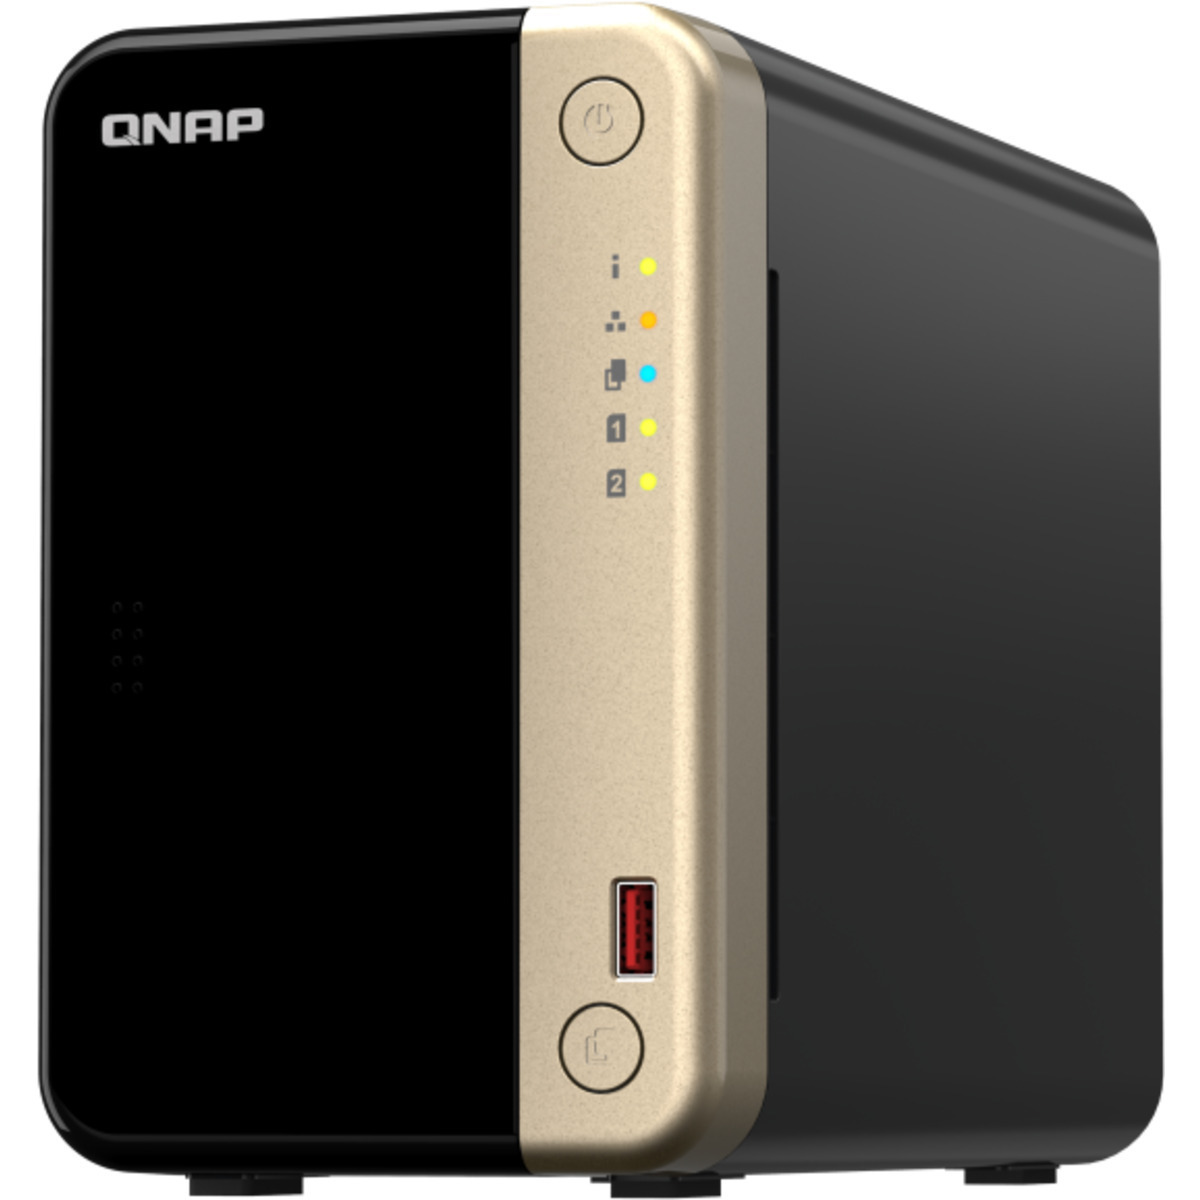 buy QNAP TS-264 8tb Desktop NAS - Network Attached Storage Device 2x4000gb Seagate BarraCuda ST4000DM004 3.5 7200rpm SATA 6Gb/s HDD CONSUMER Class Drives Installed - Burn-In Tested - ON SALE - nas headquarters buy network attached storage server device das new raid-5 free shipping simply usa TS-264